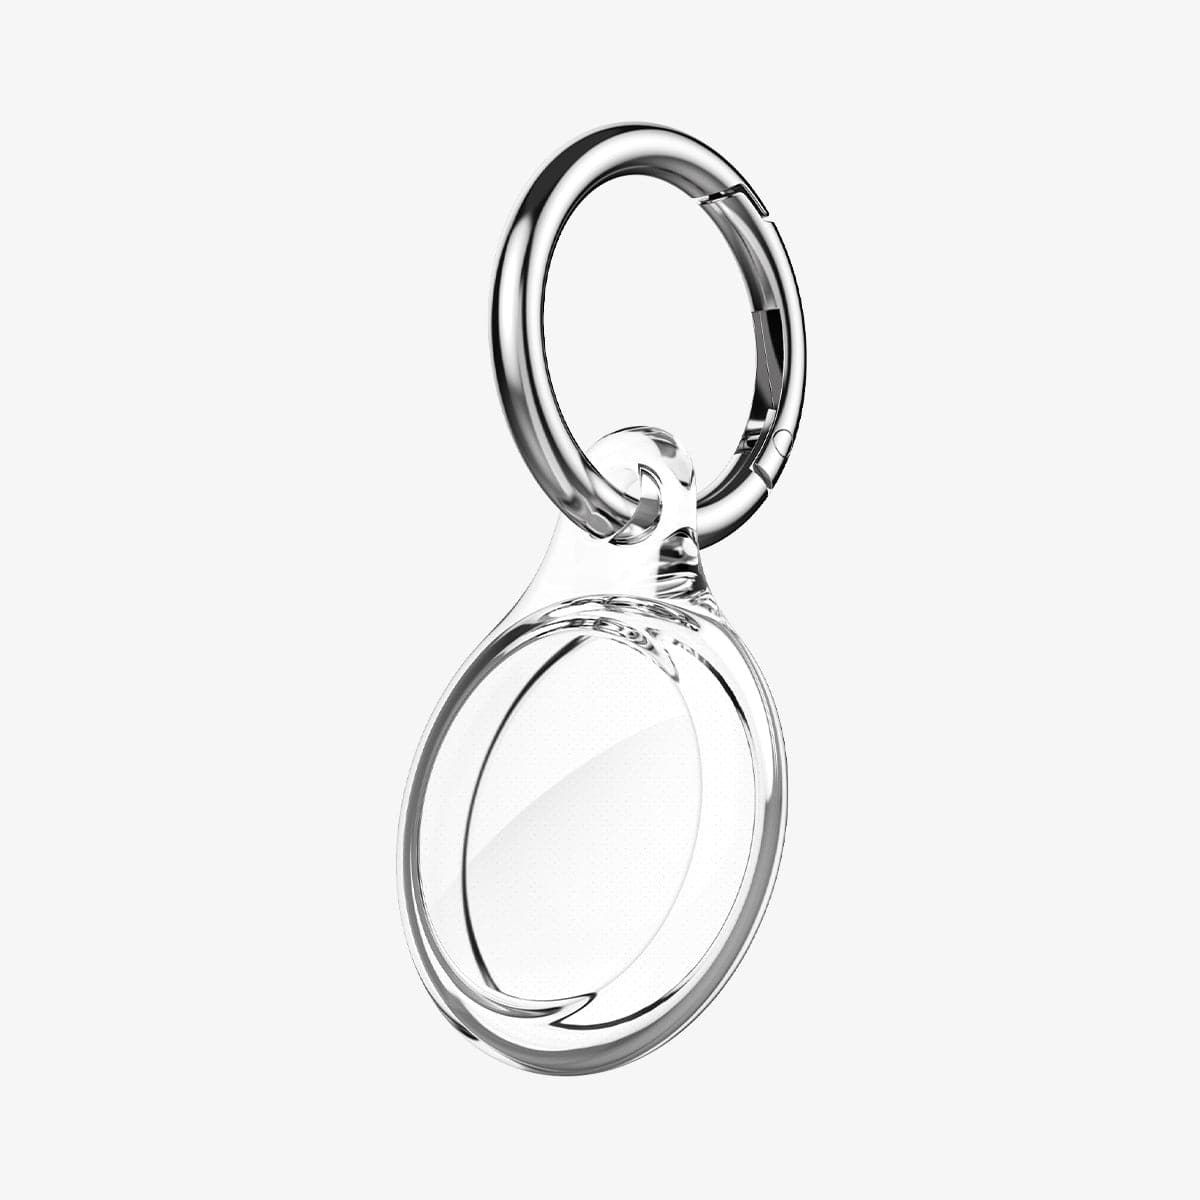 AHP03124 - Apple AirTag Case Ultra Hybrid in crystal clear showing the front without airtag on keyring